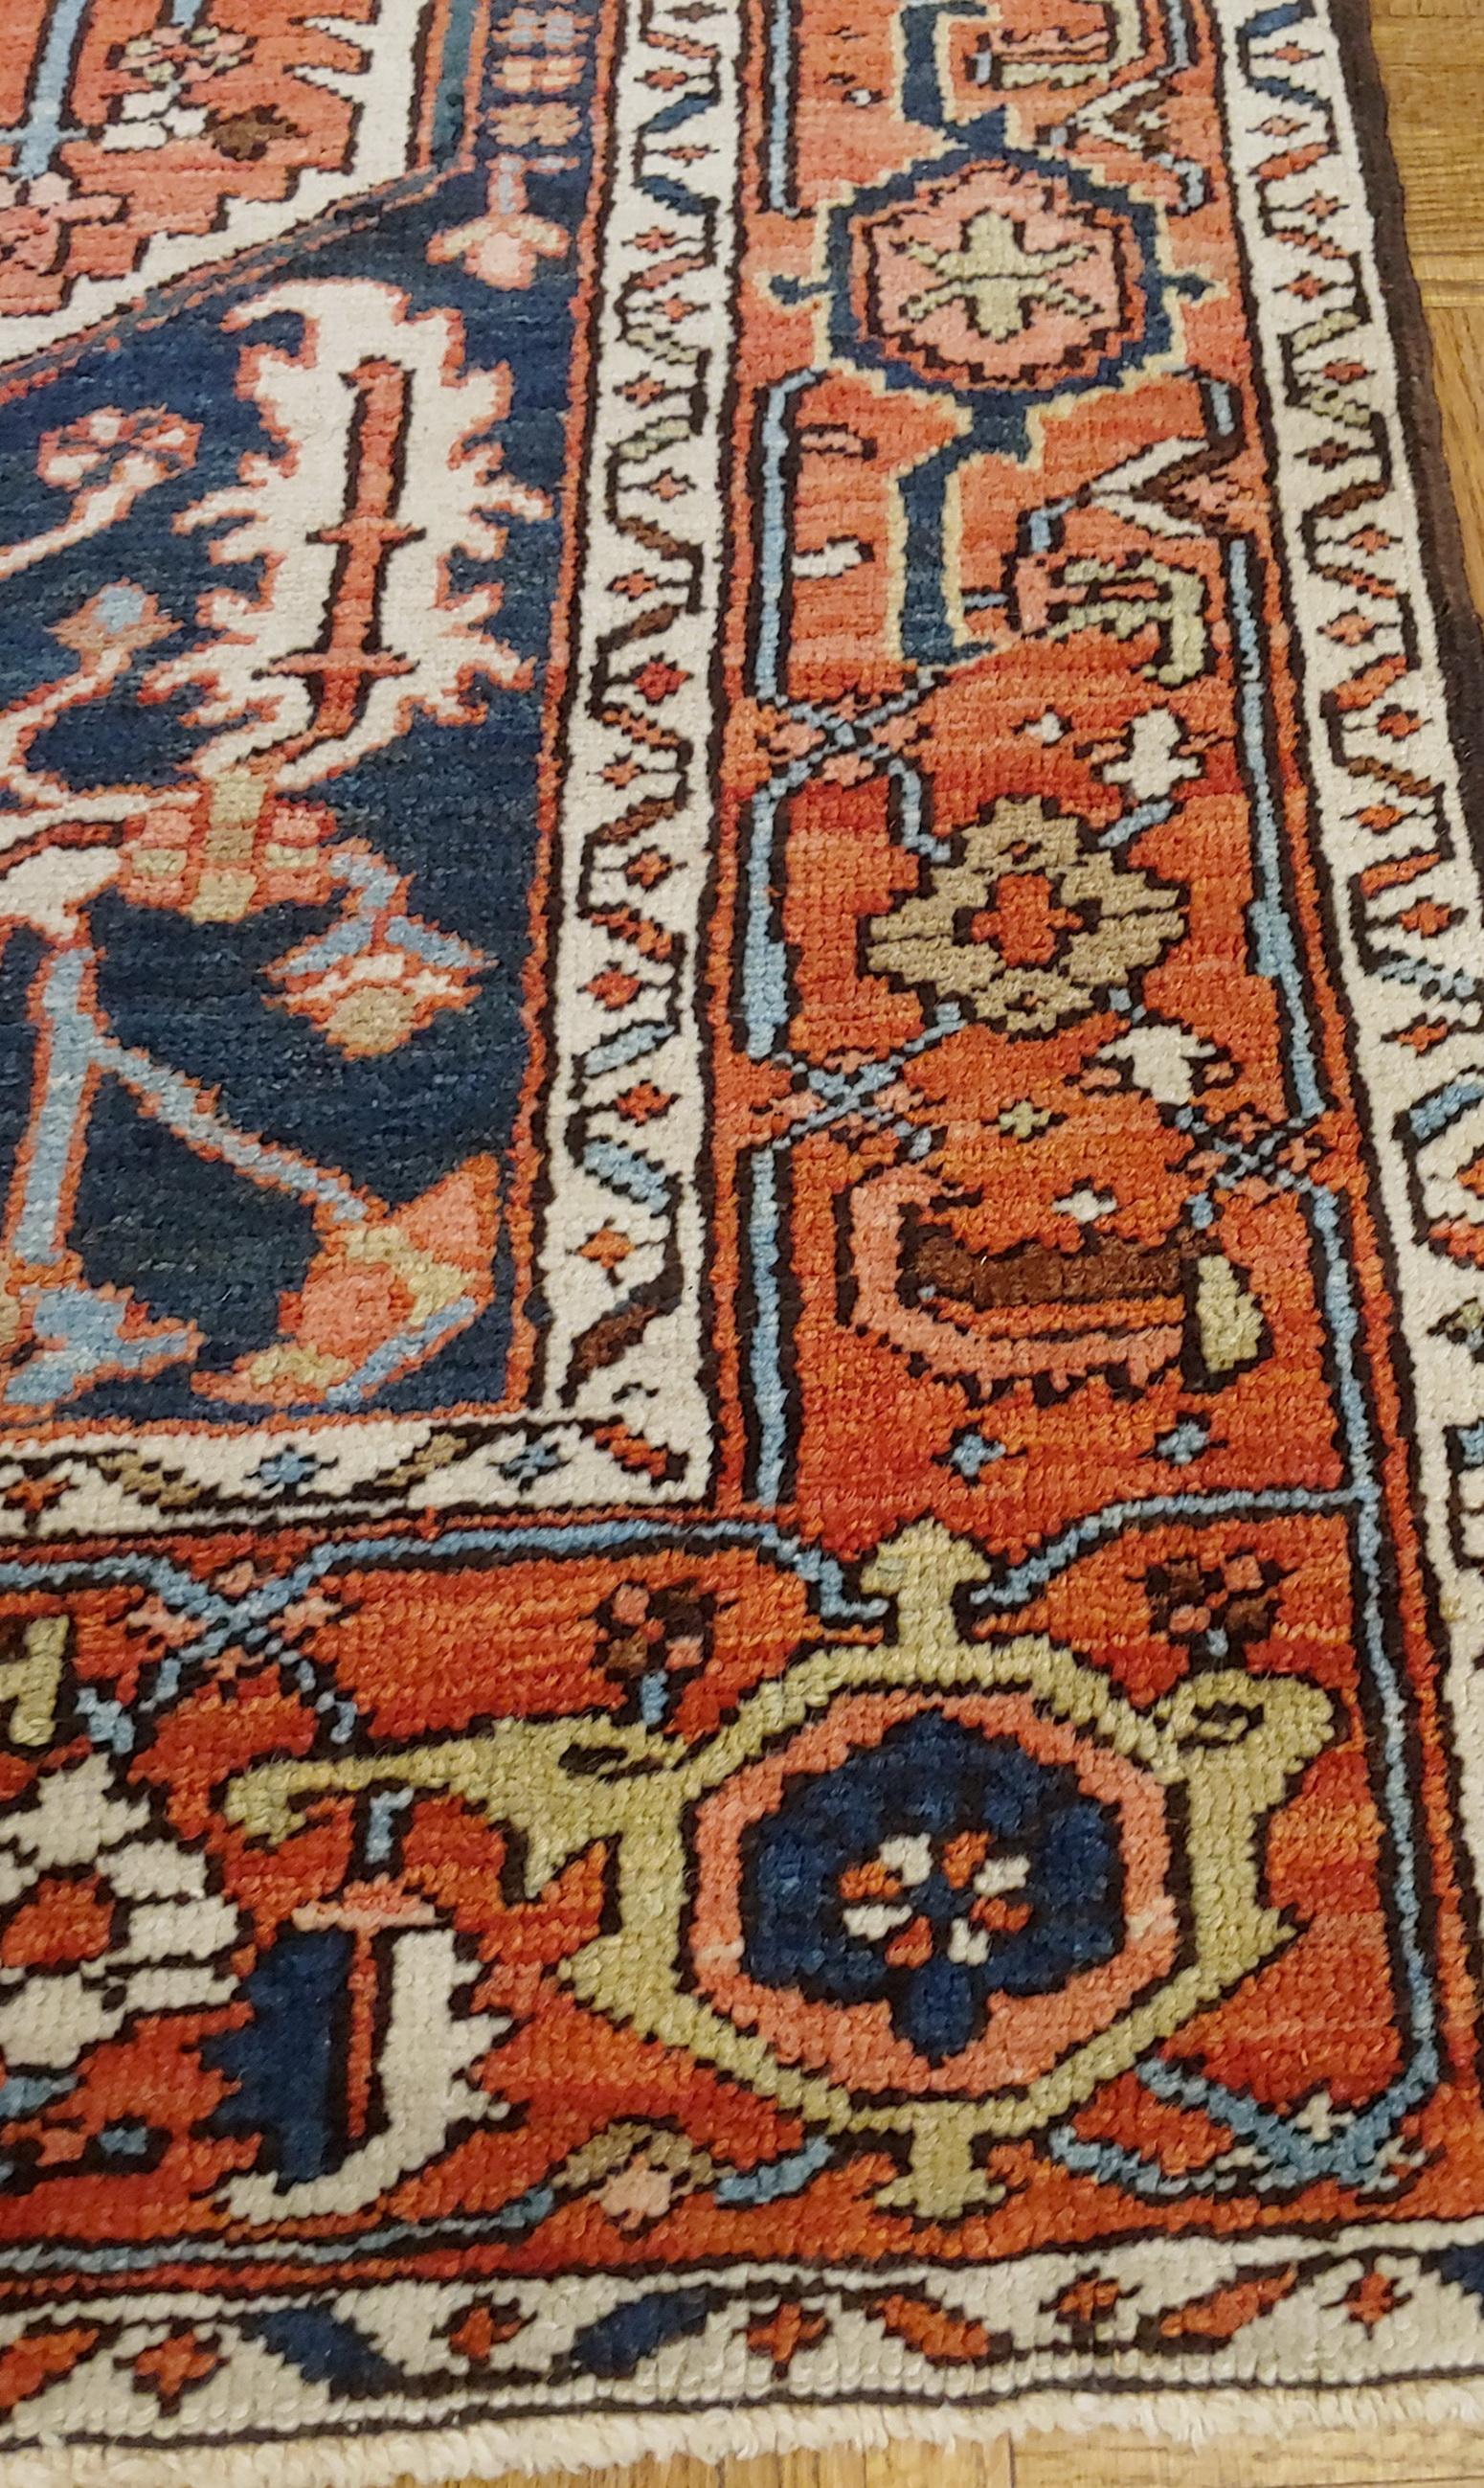 Woven Antique Persian Serapi, Geometric Design, Rust & Navy, Scatter Size, Wool, 1900